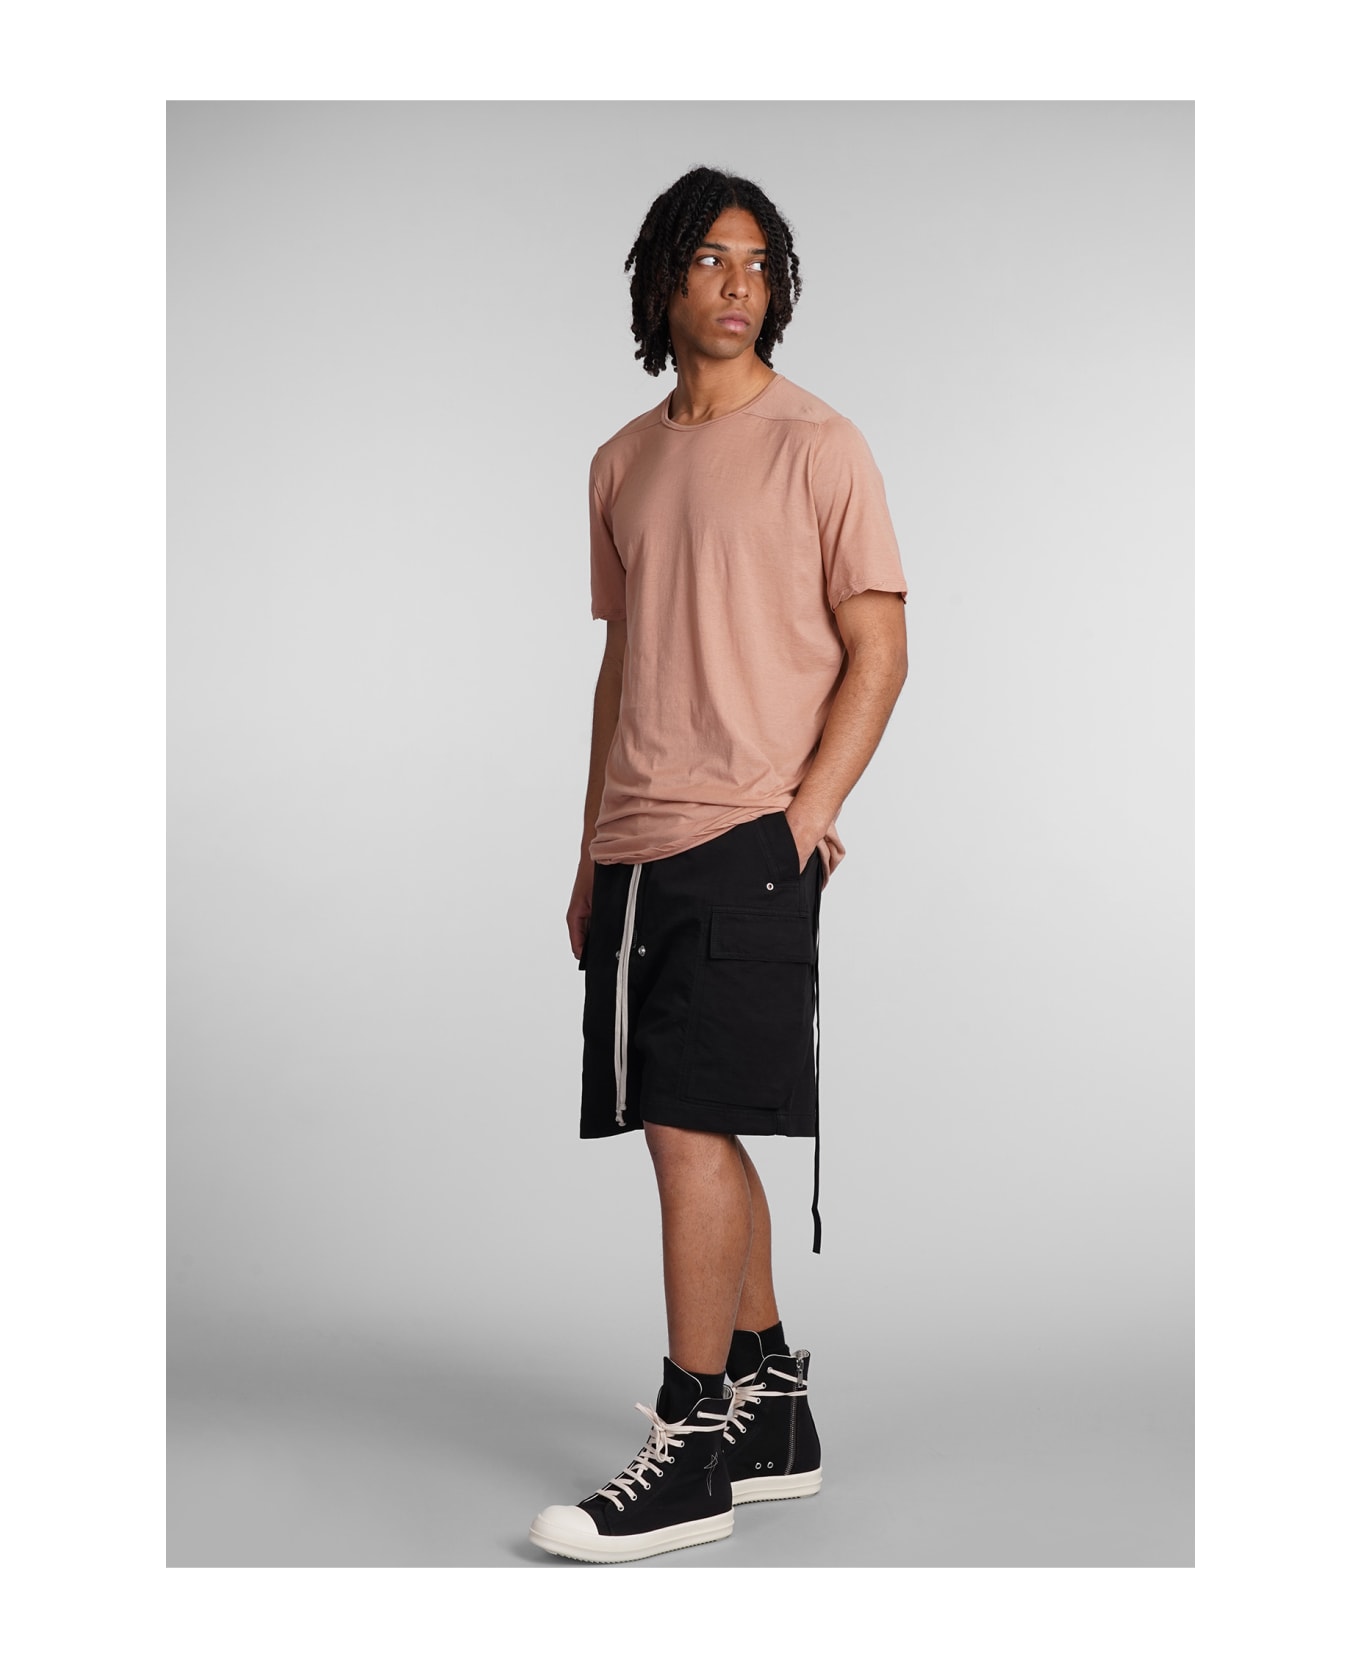 DRKSHDW Level T T-shirt In Rose-pink Cotton - rose-pink シャツ